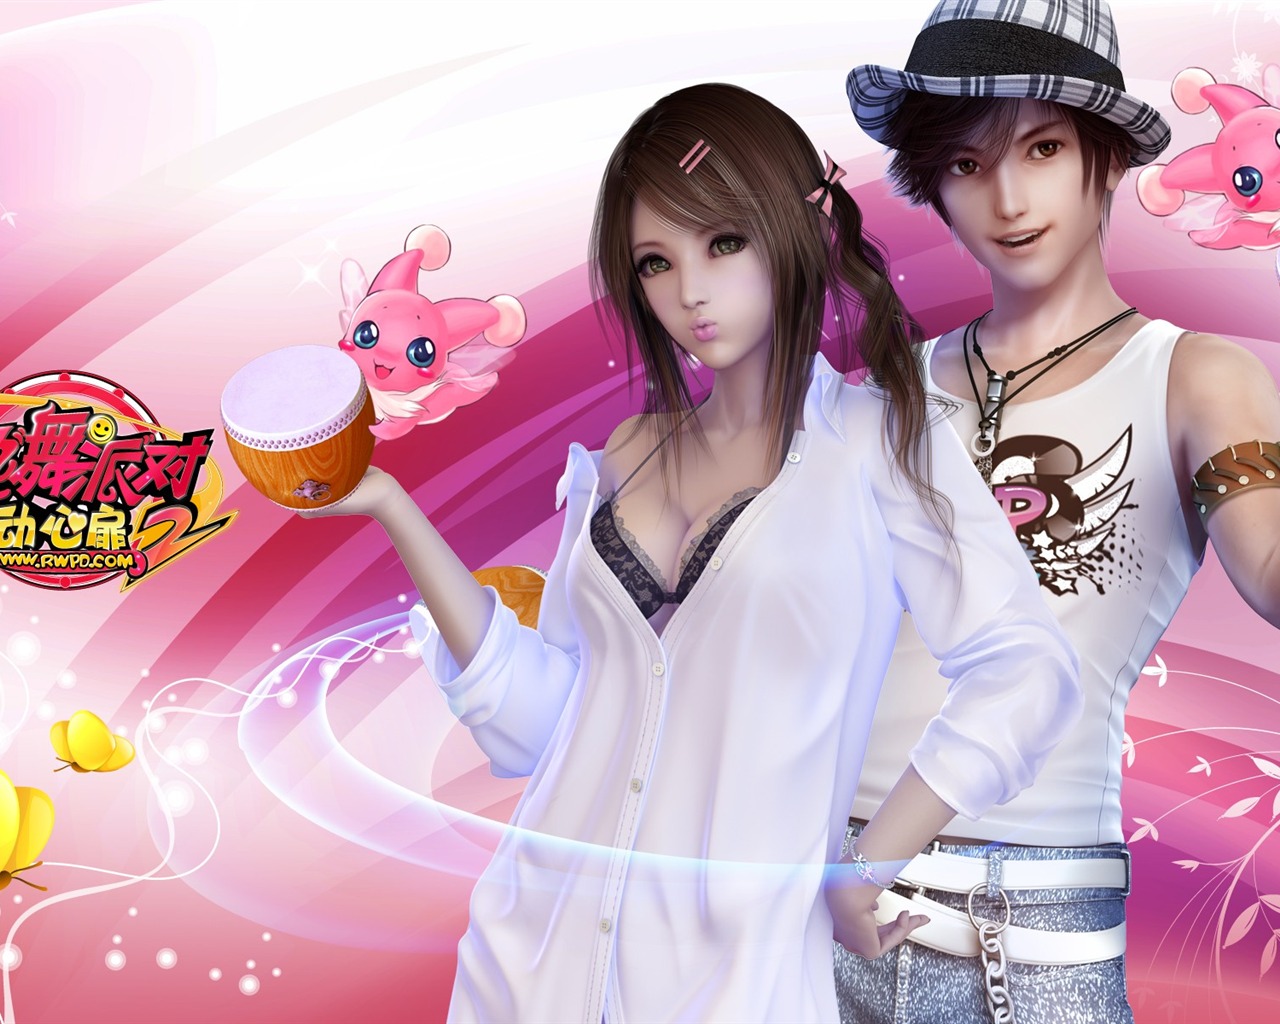 Online game Hot Dance Party II official wallpapers #21 - 1280x1024